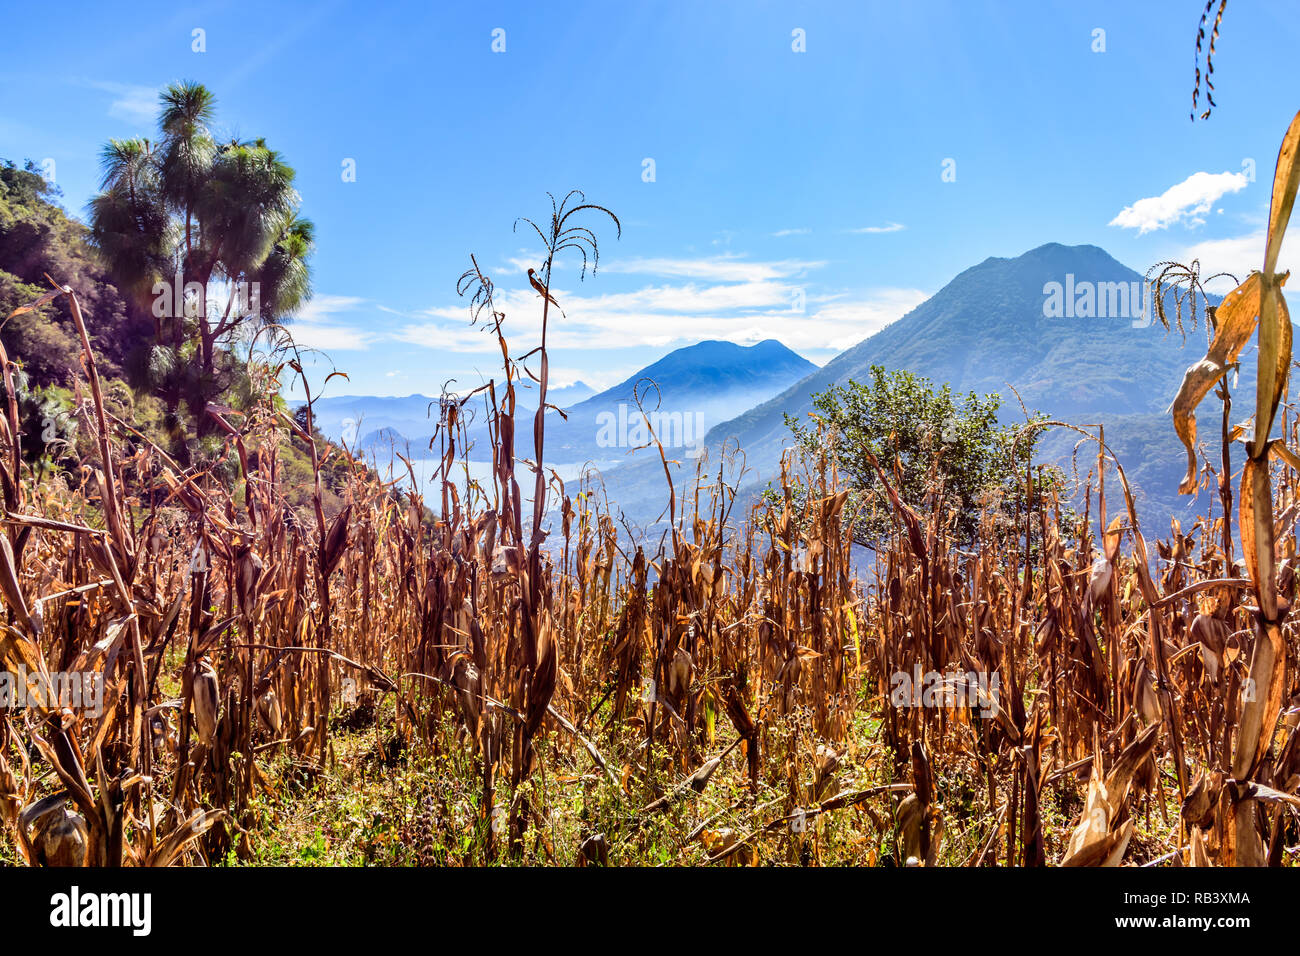 View of Lake Atitlan & 5 volcanoes looking through hilltop maize field in Guatemalan highlands. Stock Photo